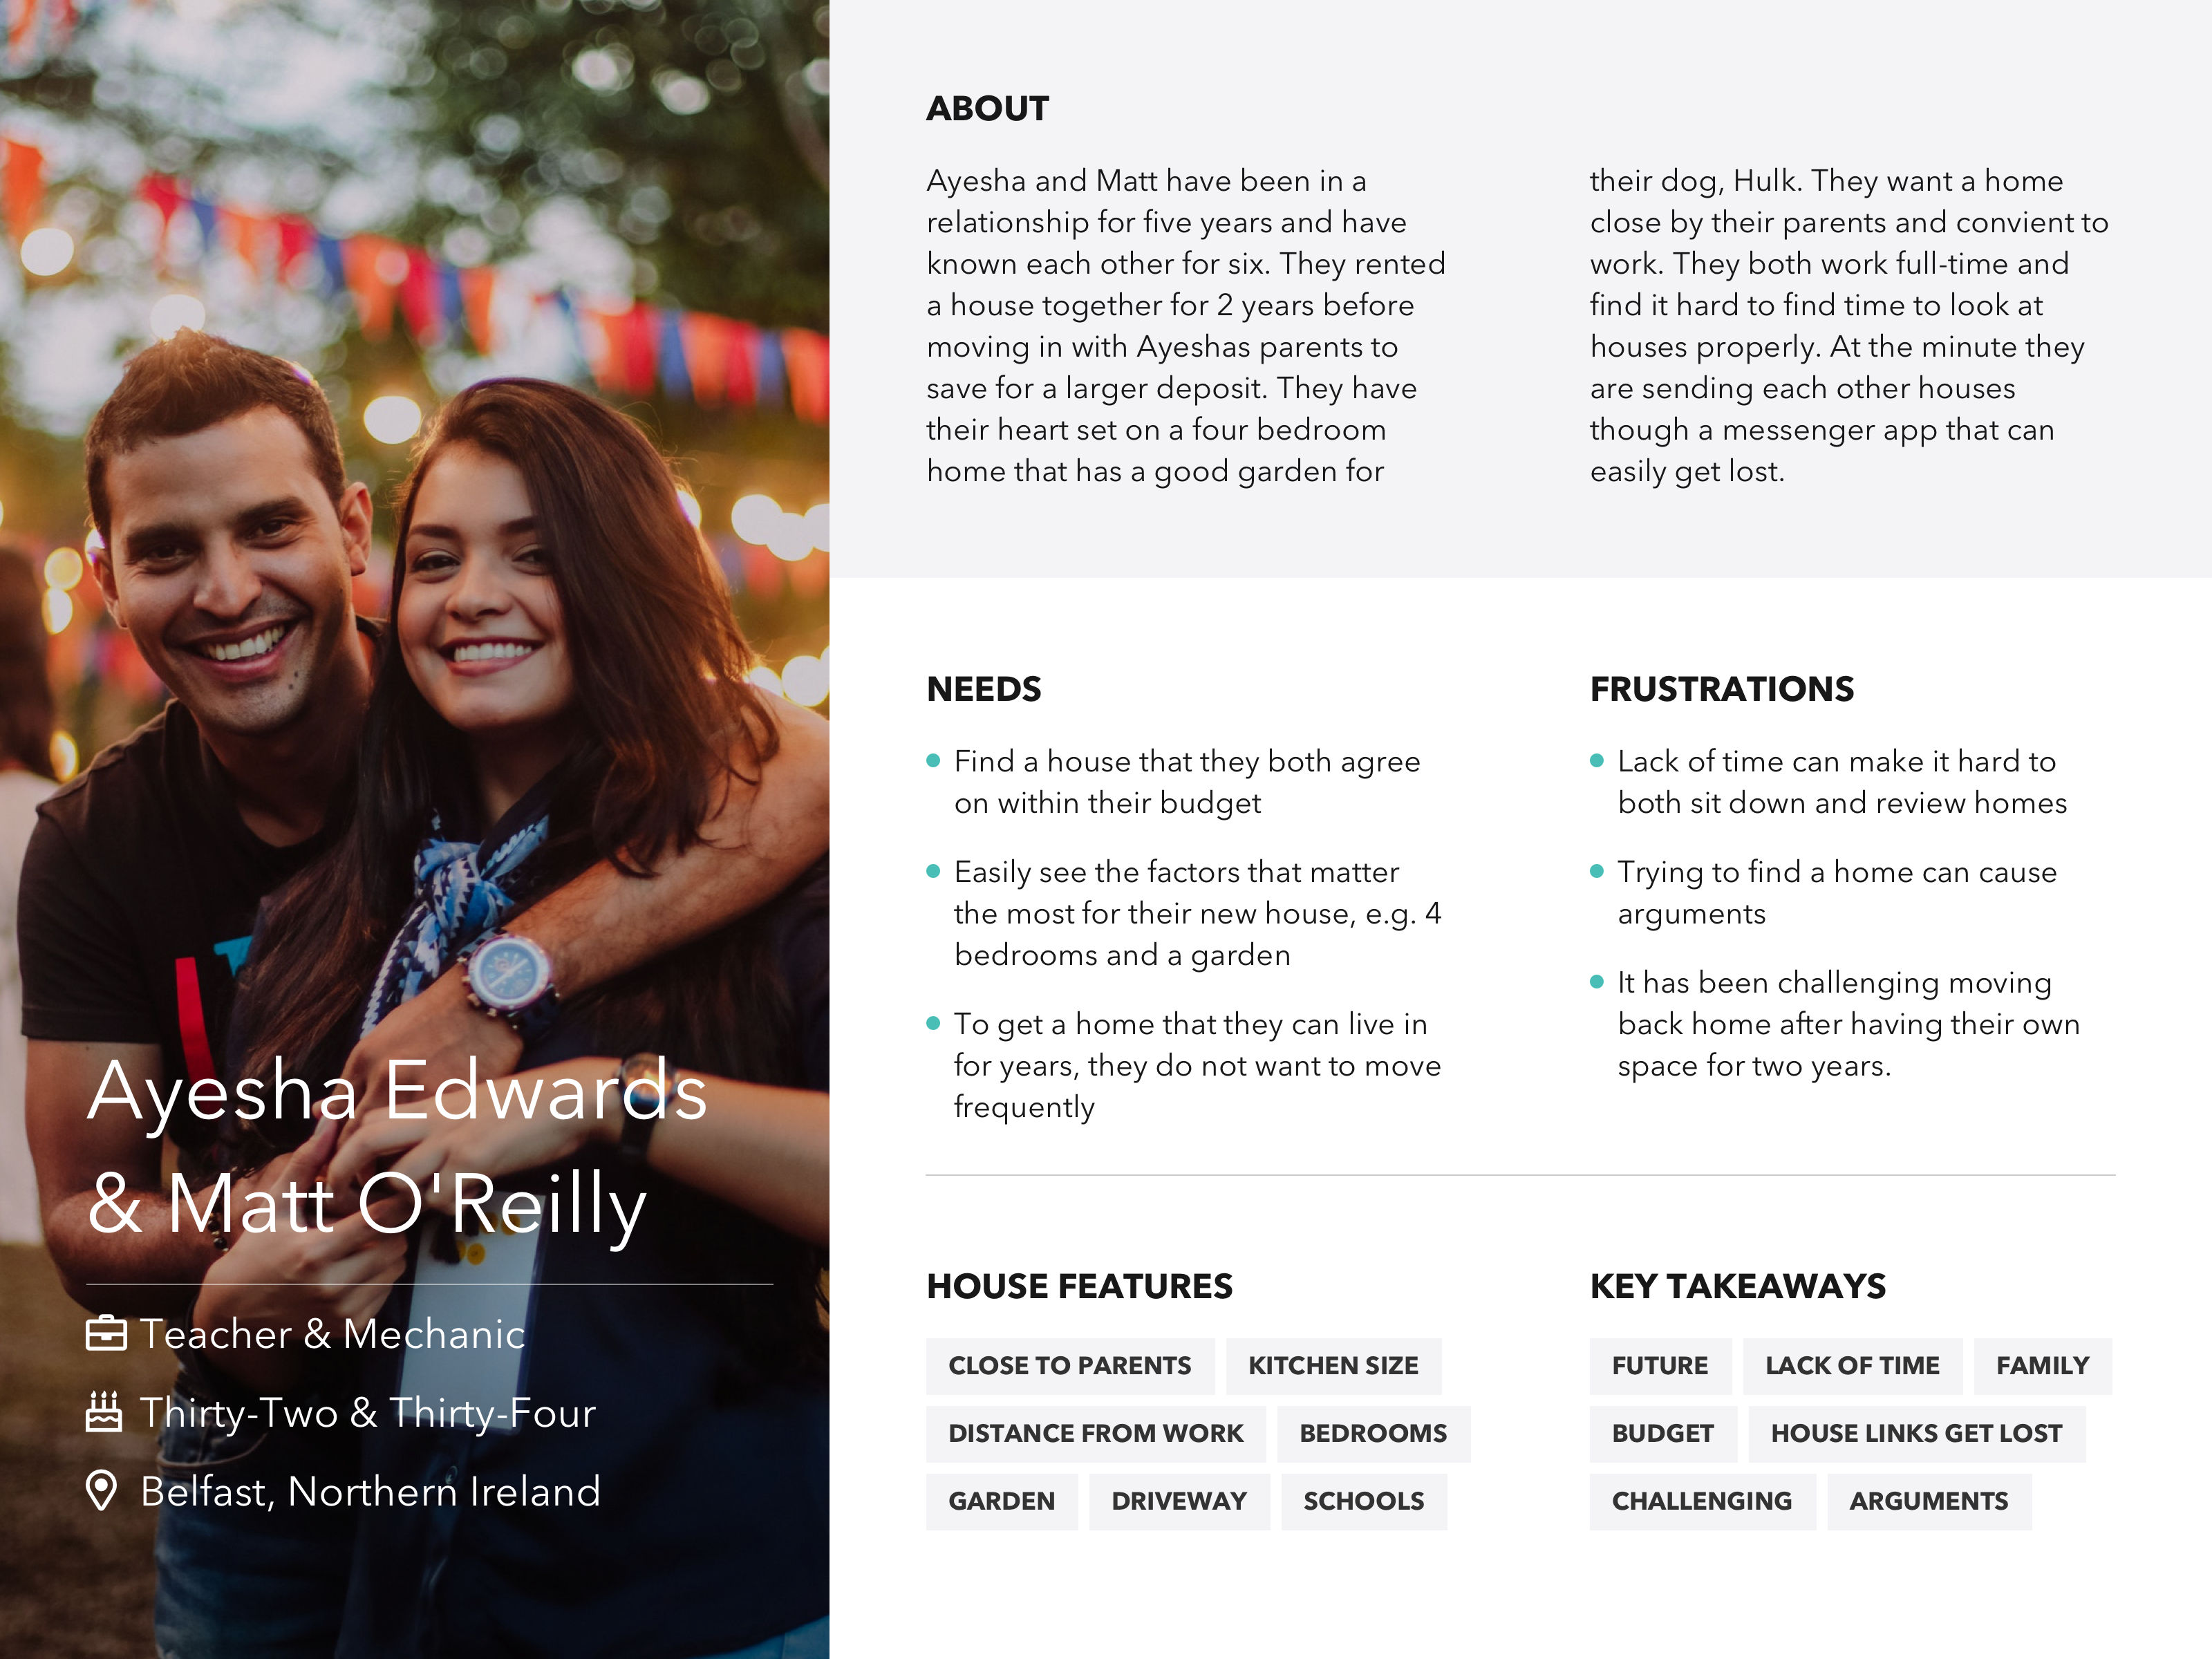 User persona of Ayesha Edwards
& Matt O'Reilly, a couple from Belfast looking to buy a home together.